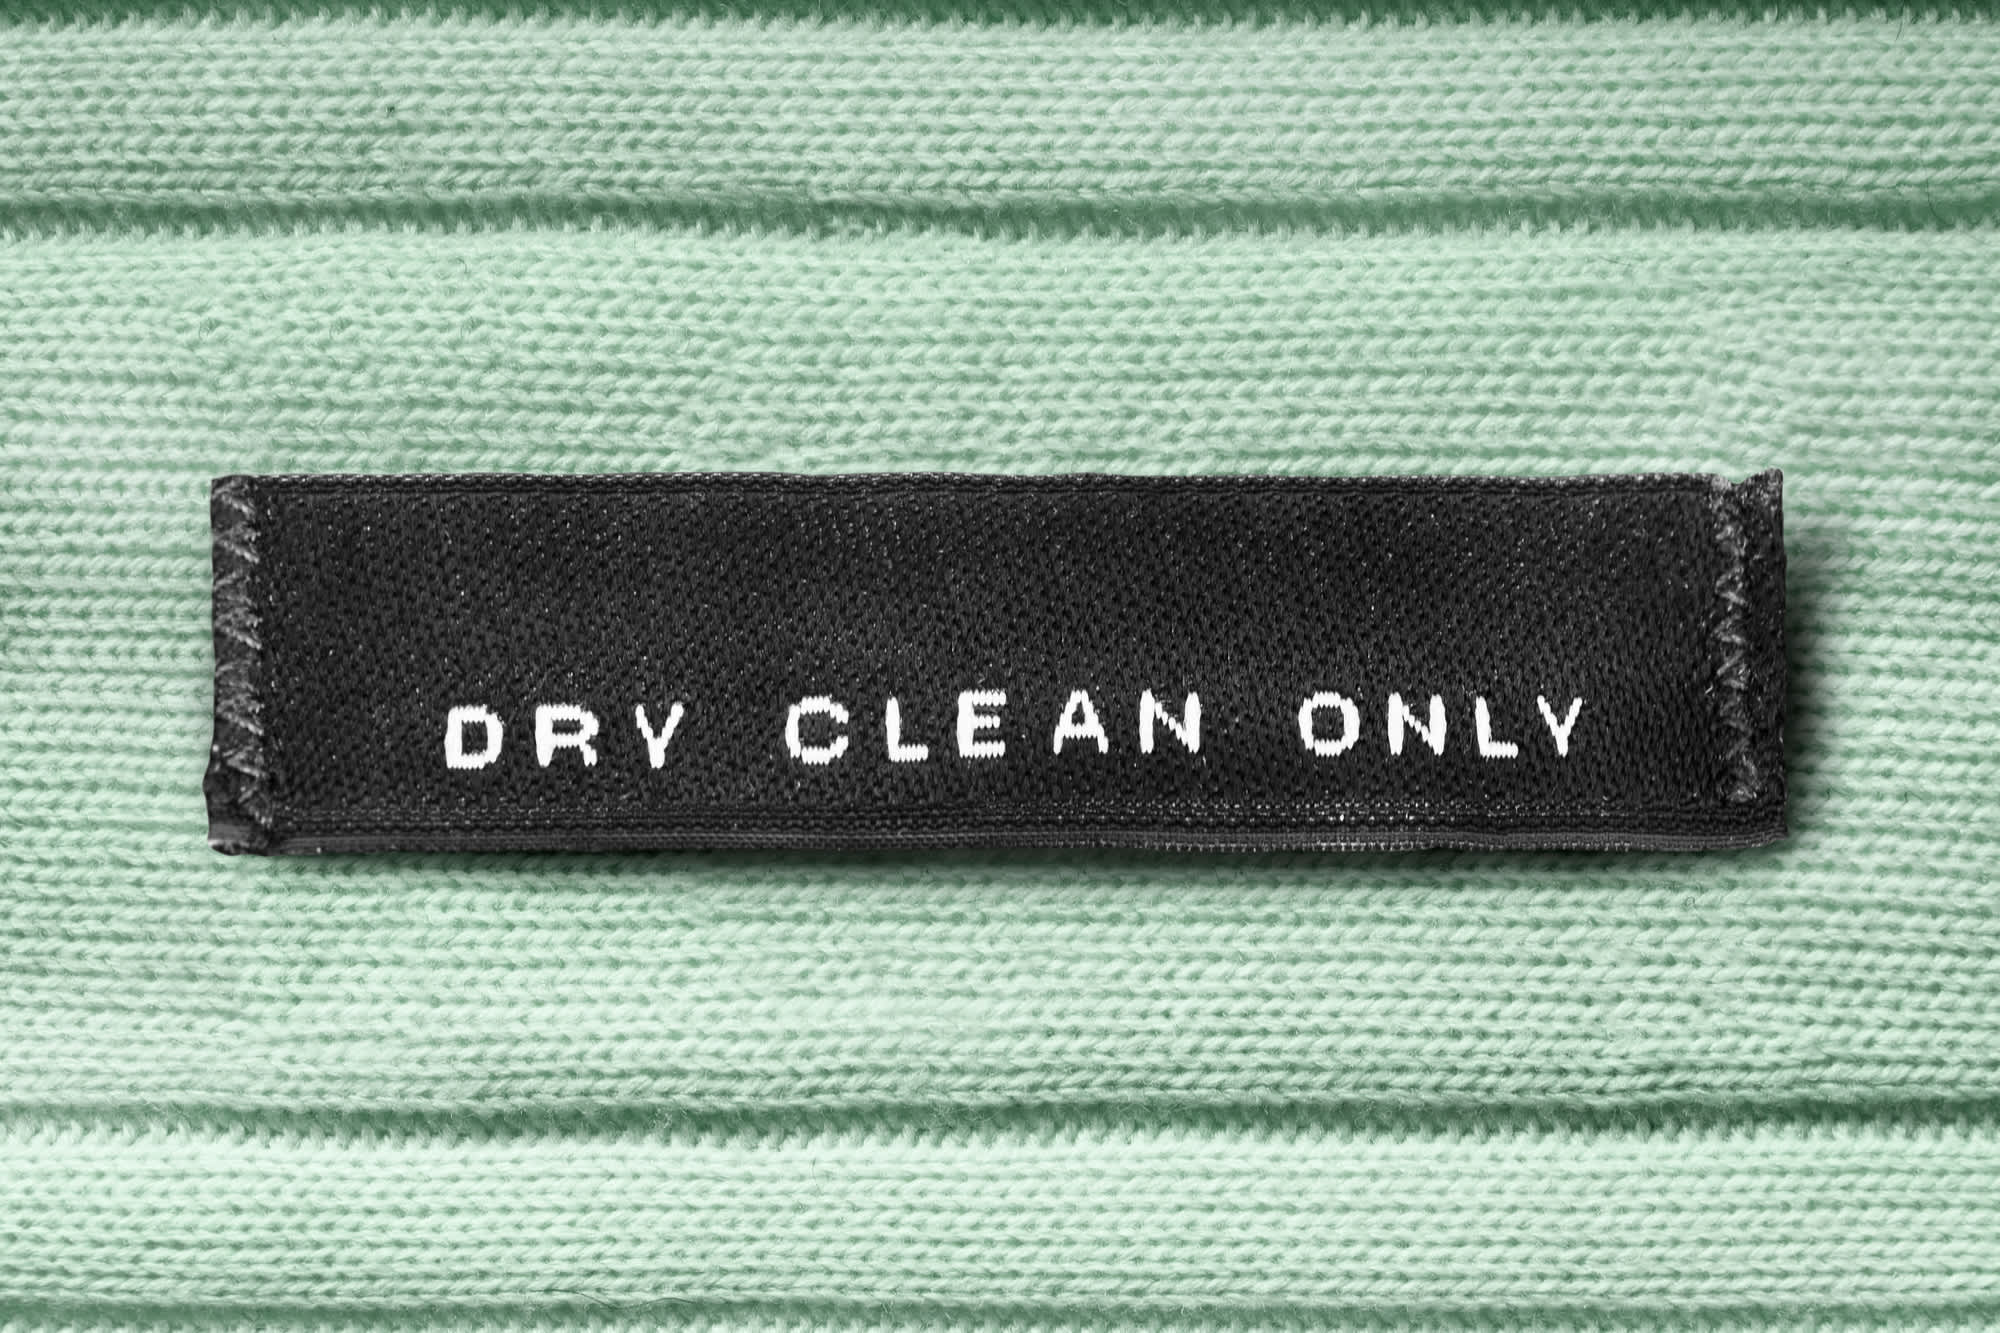 Dry clean only. Adidas Dry clean only. The only clean. Label clothes. Dry cleaning only